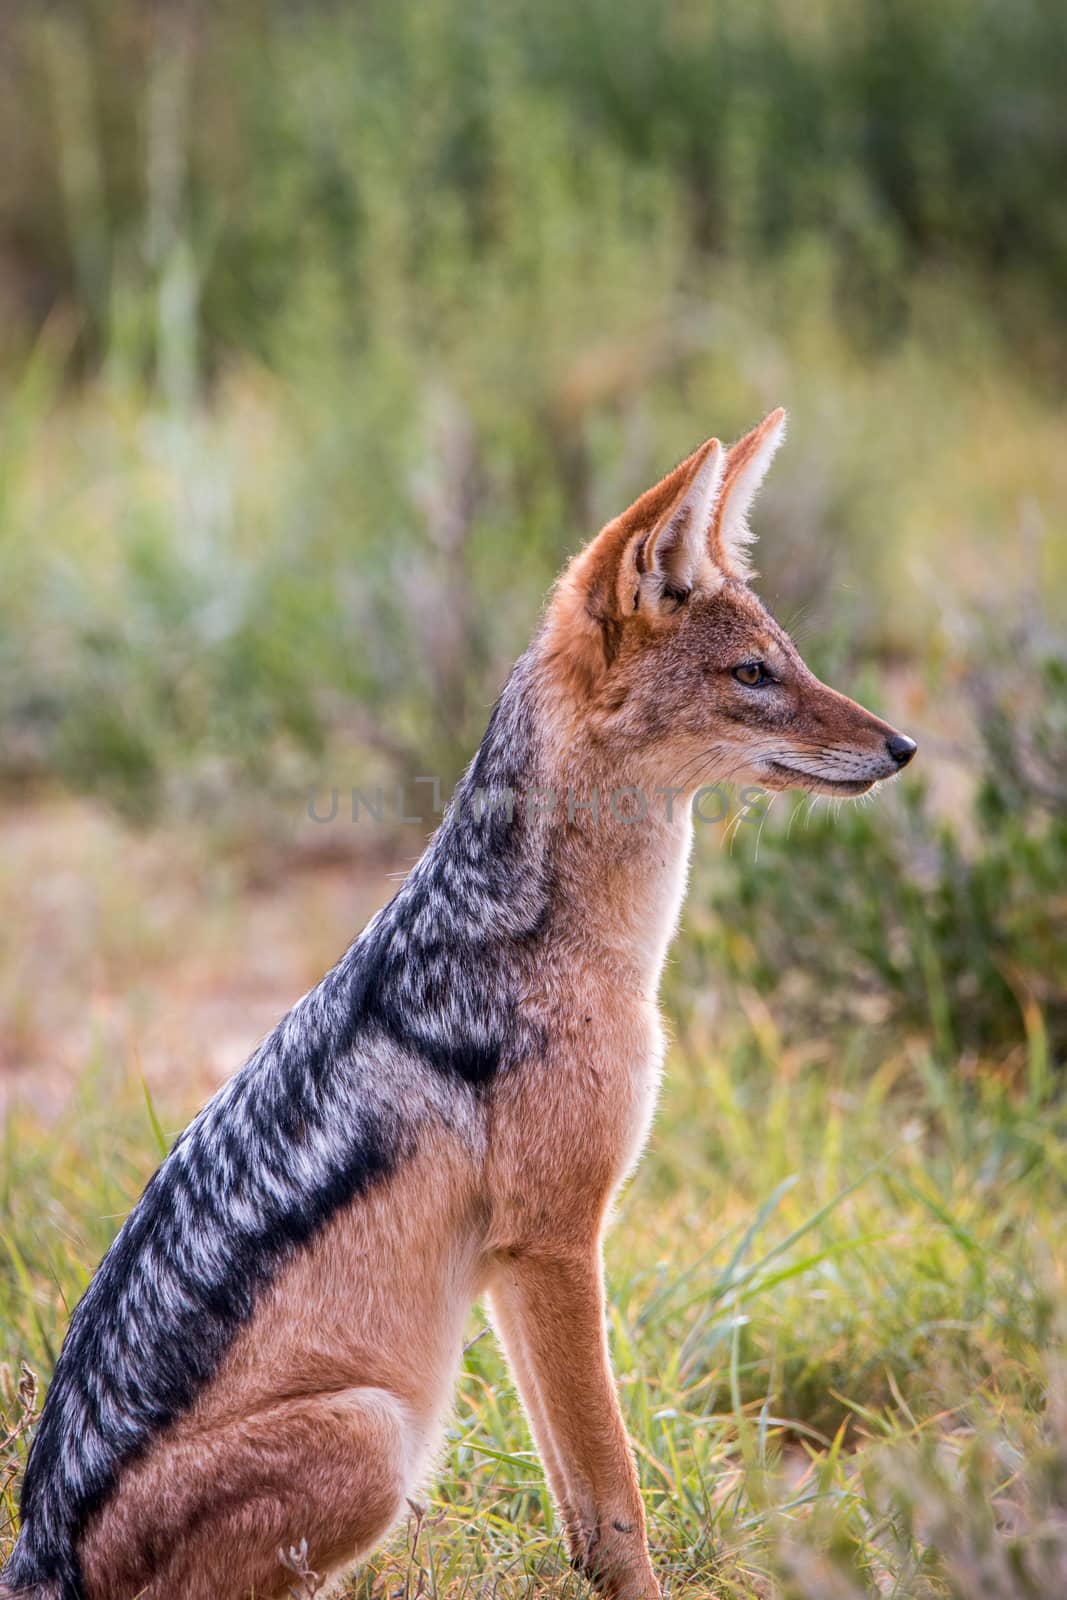 Side profile of a sitting Black-backed jackal in the Kgalagadi Transfrontier Park, South Africa.